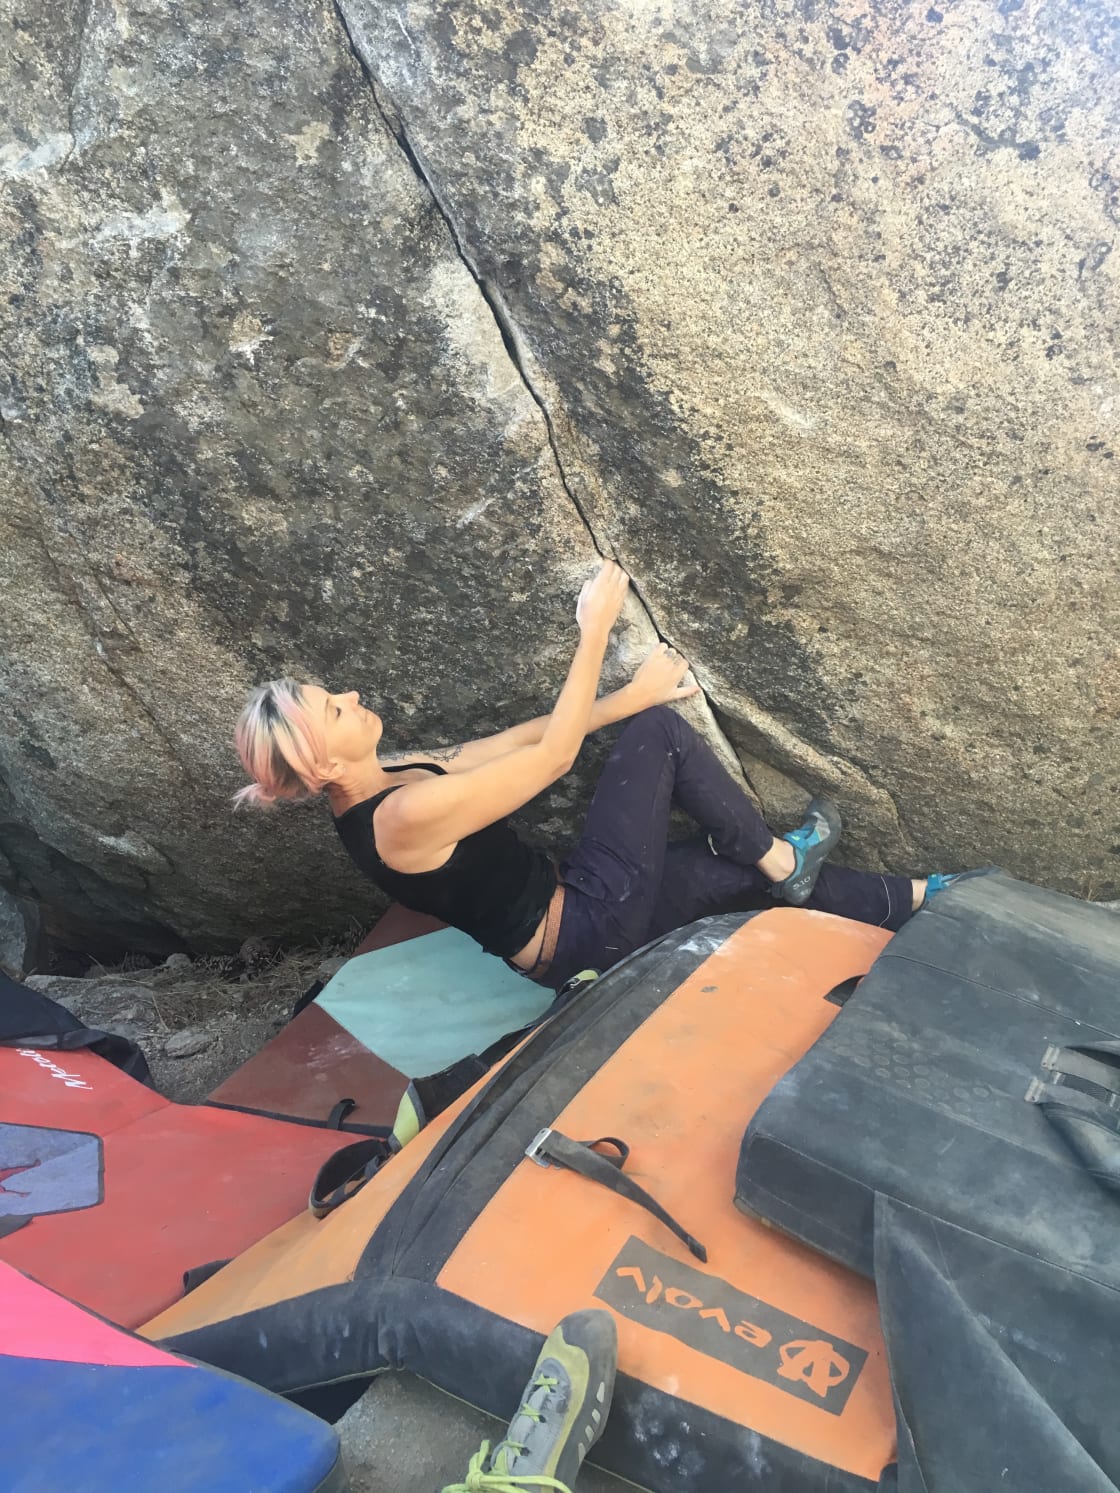 Awesome bouldering